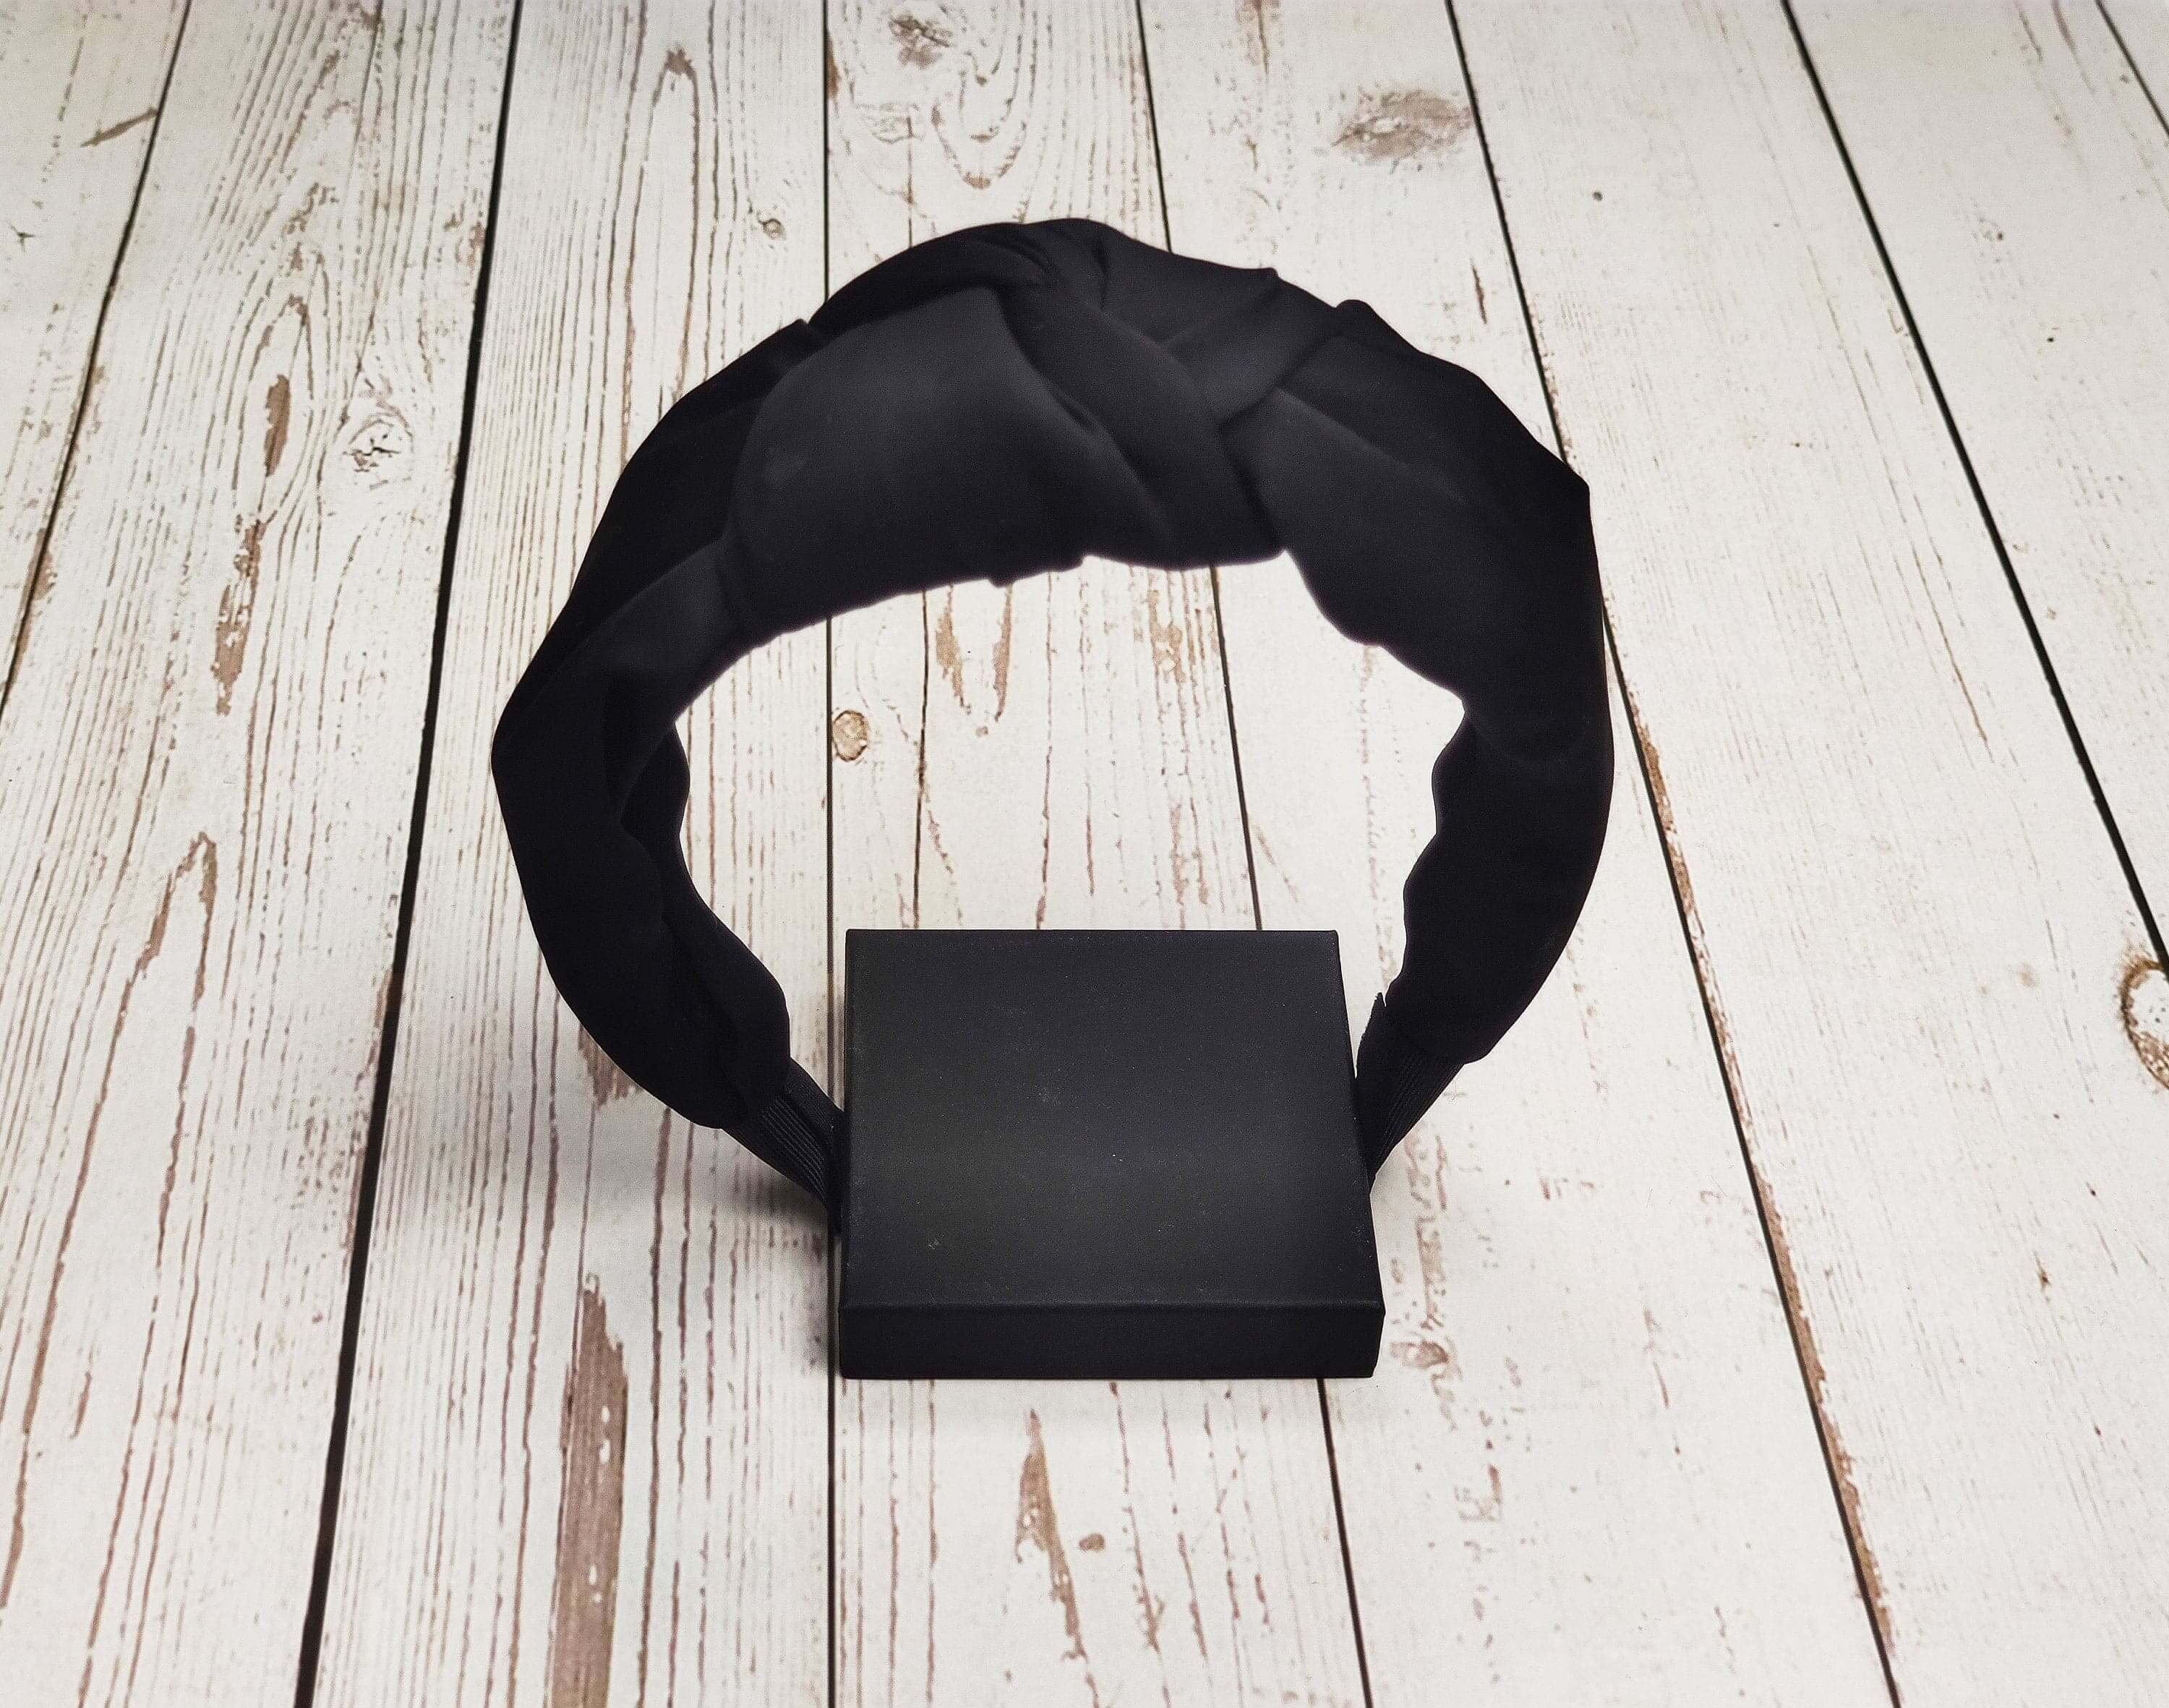 If you are looking for a stylish, fashionable, and practical hairband that you can wear both day and evening, then check out these black twist knot headbands! They are made from soft and comfy viscose crepe material.